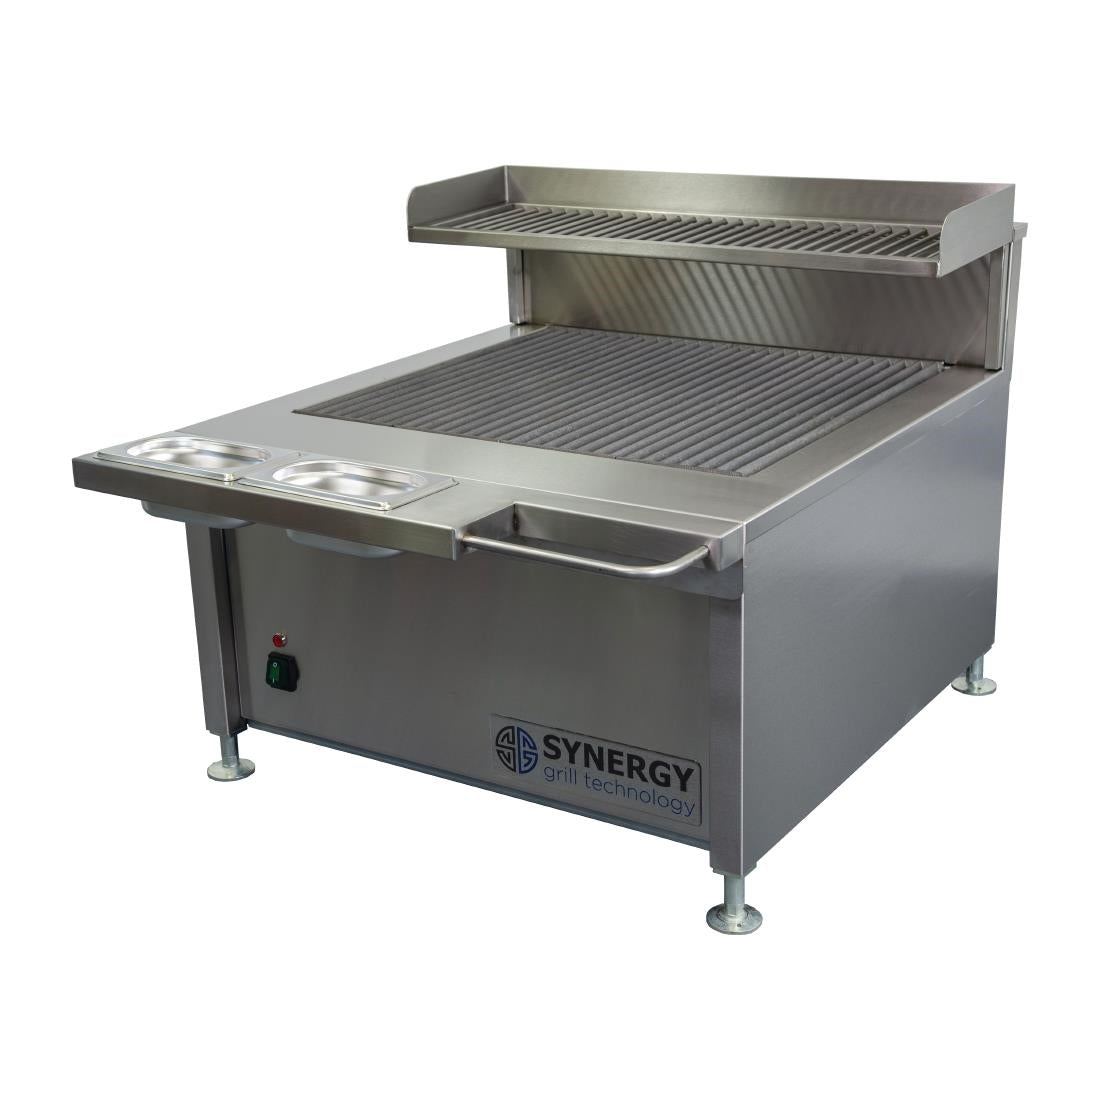 Synergy SG630 Compact Grill with Garnish Rail and Slow Cook Shelf